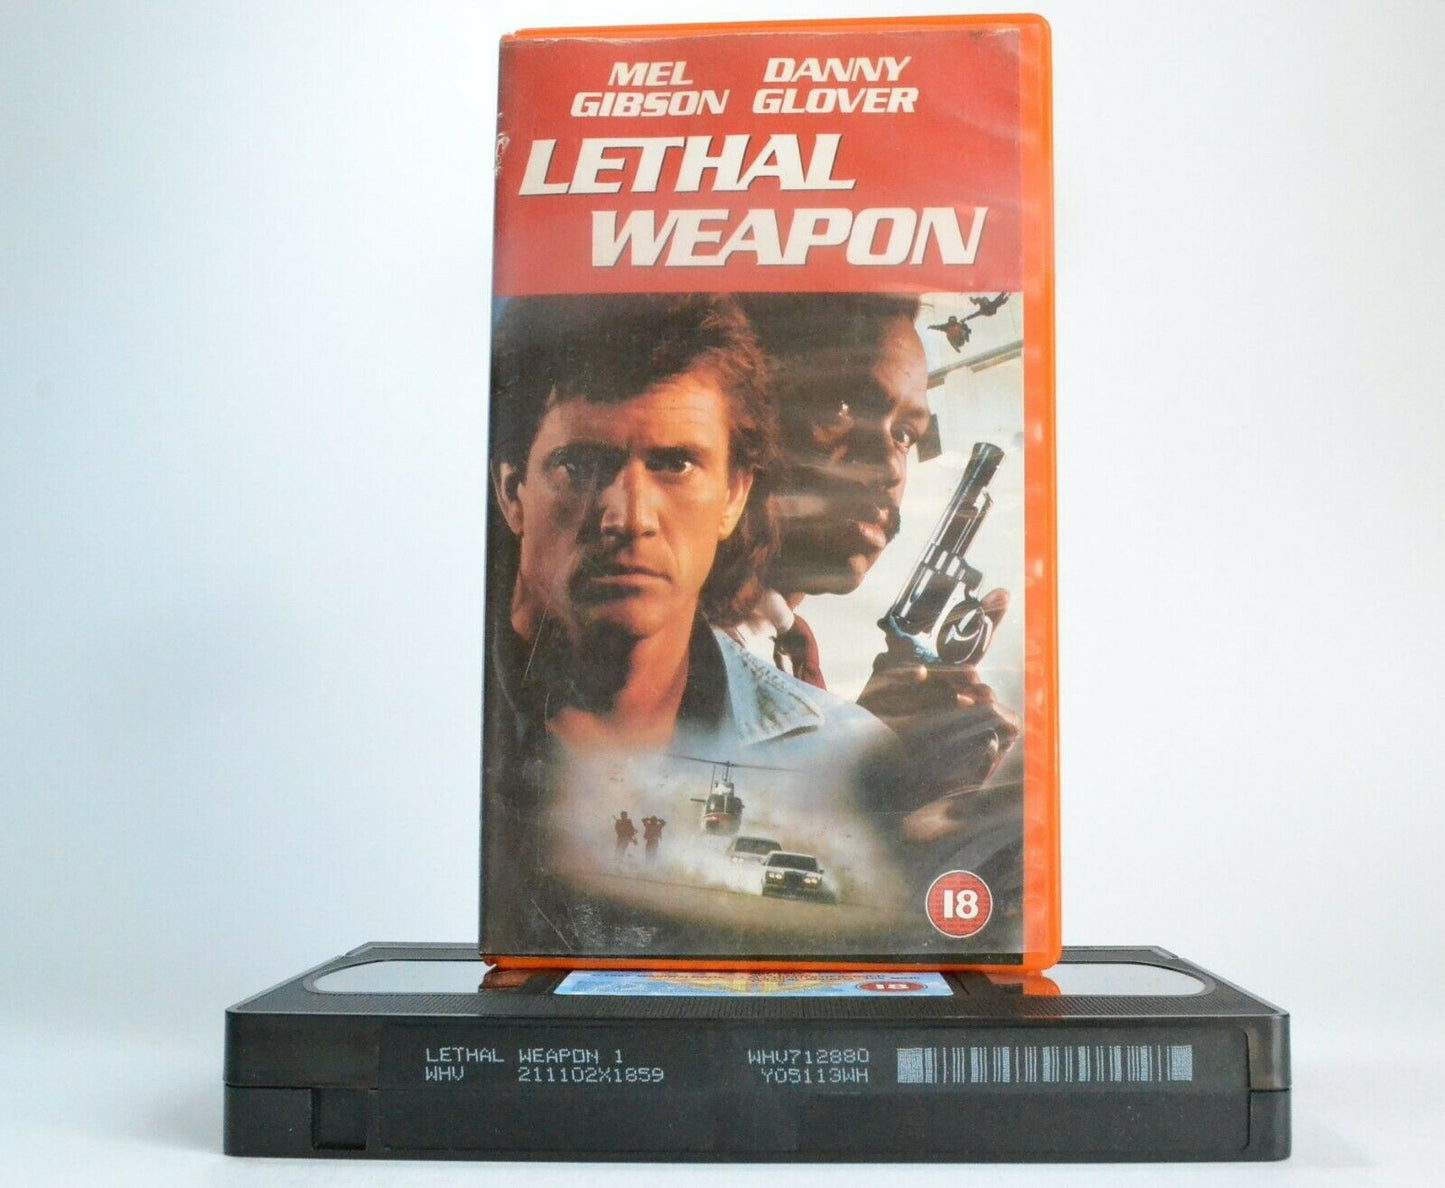 Lethal Weapon (1987): Explosive Buddy Cop Action - Mel Gibson/Danny Glover - VHS-